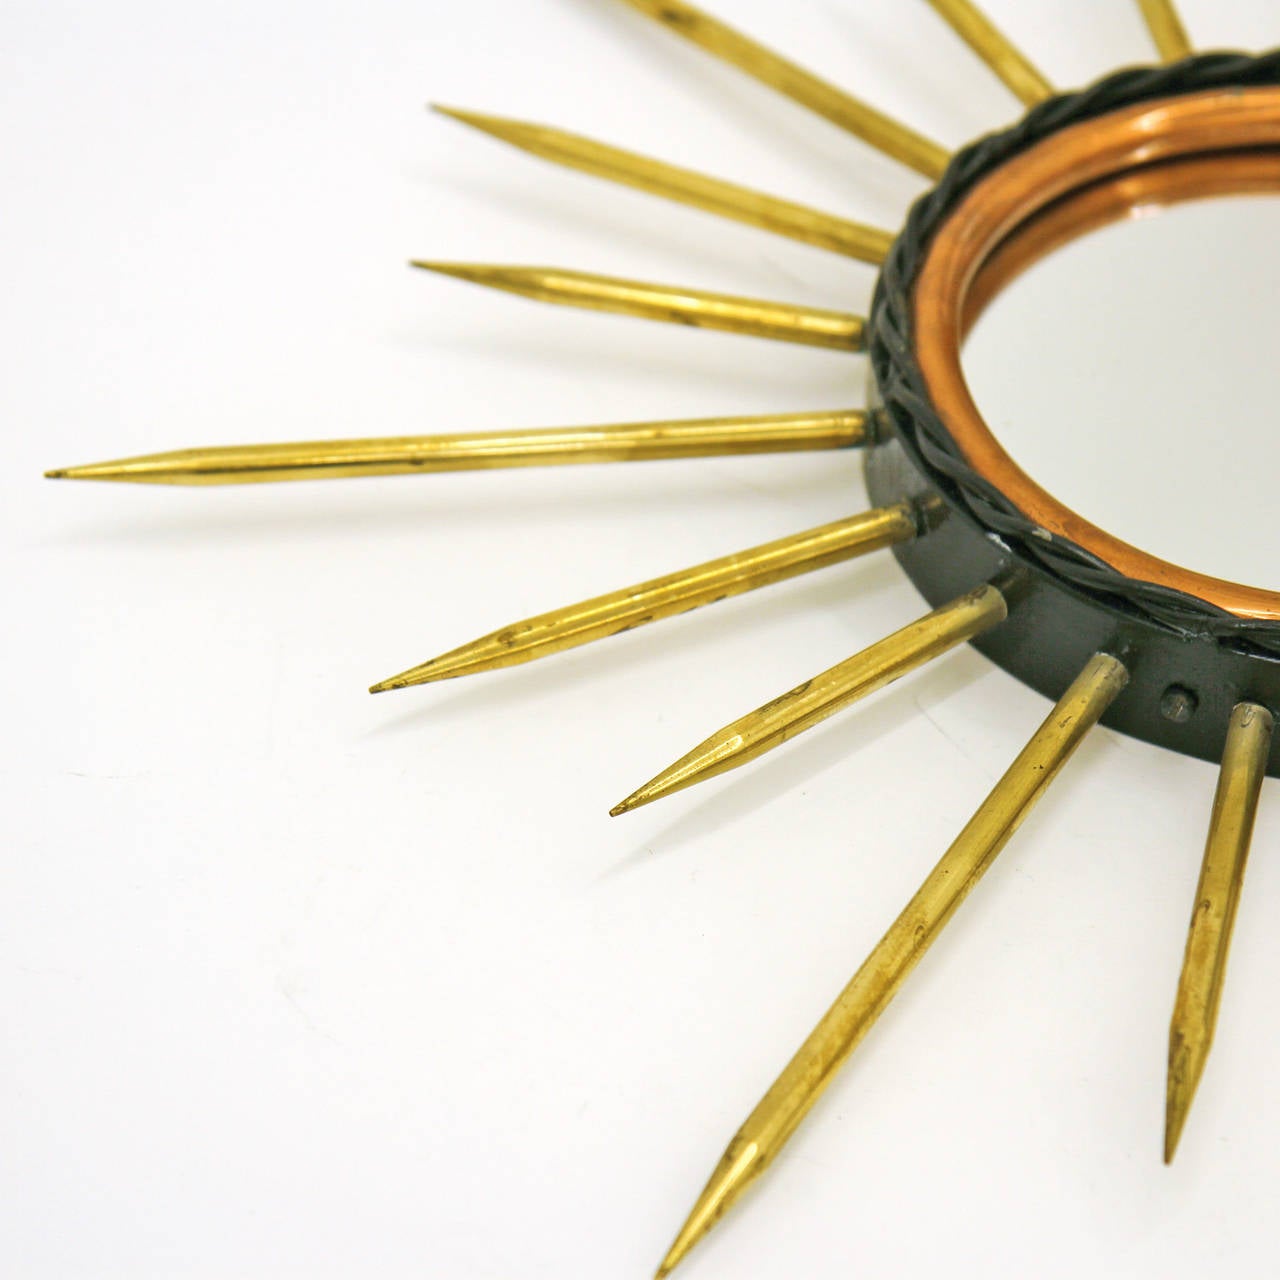 Unique vintage sunburst mirror from France made of three different metals: A black lacquered iron belt with wrought detailing, a copper ring on the inside and solid thick brass 